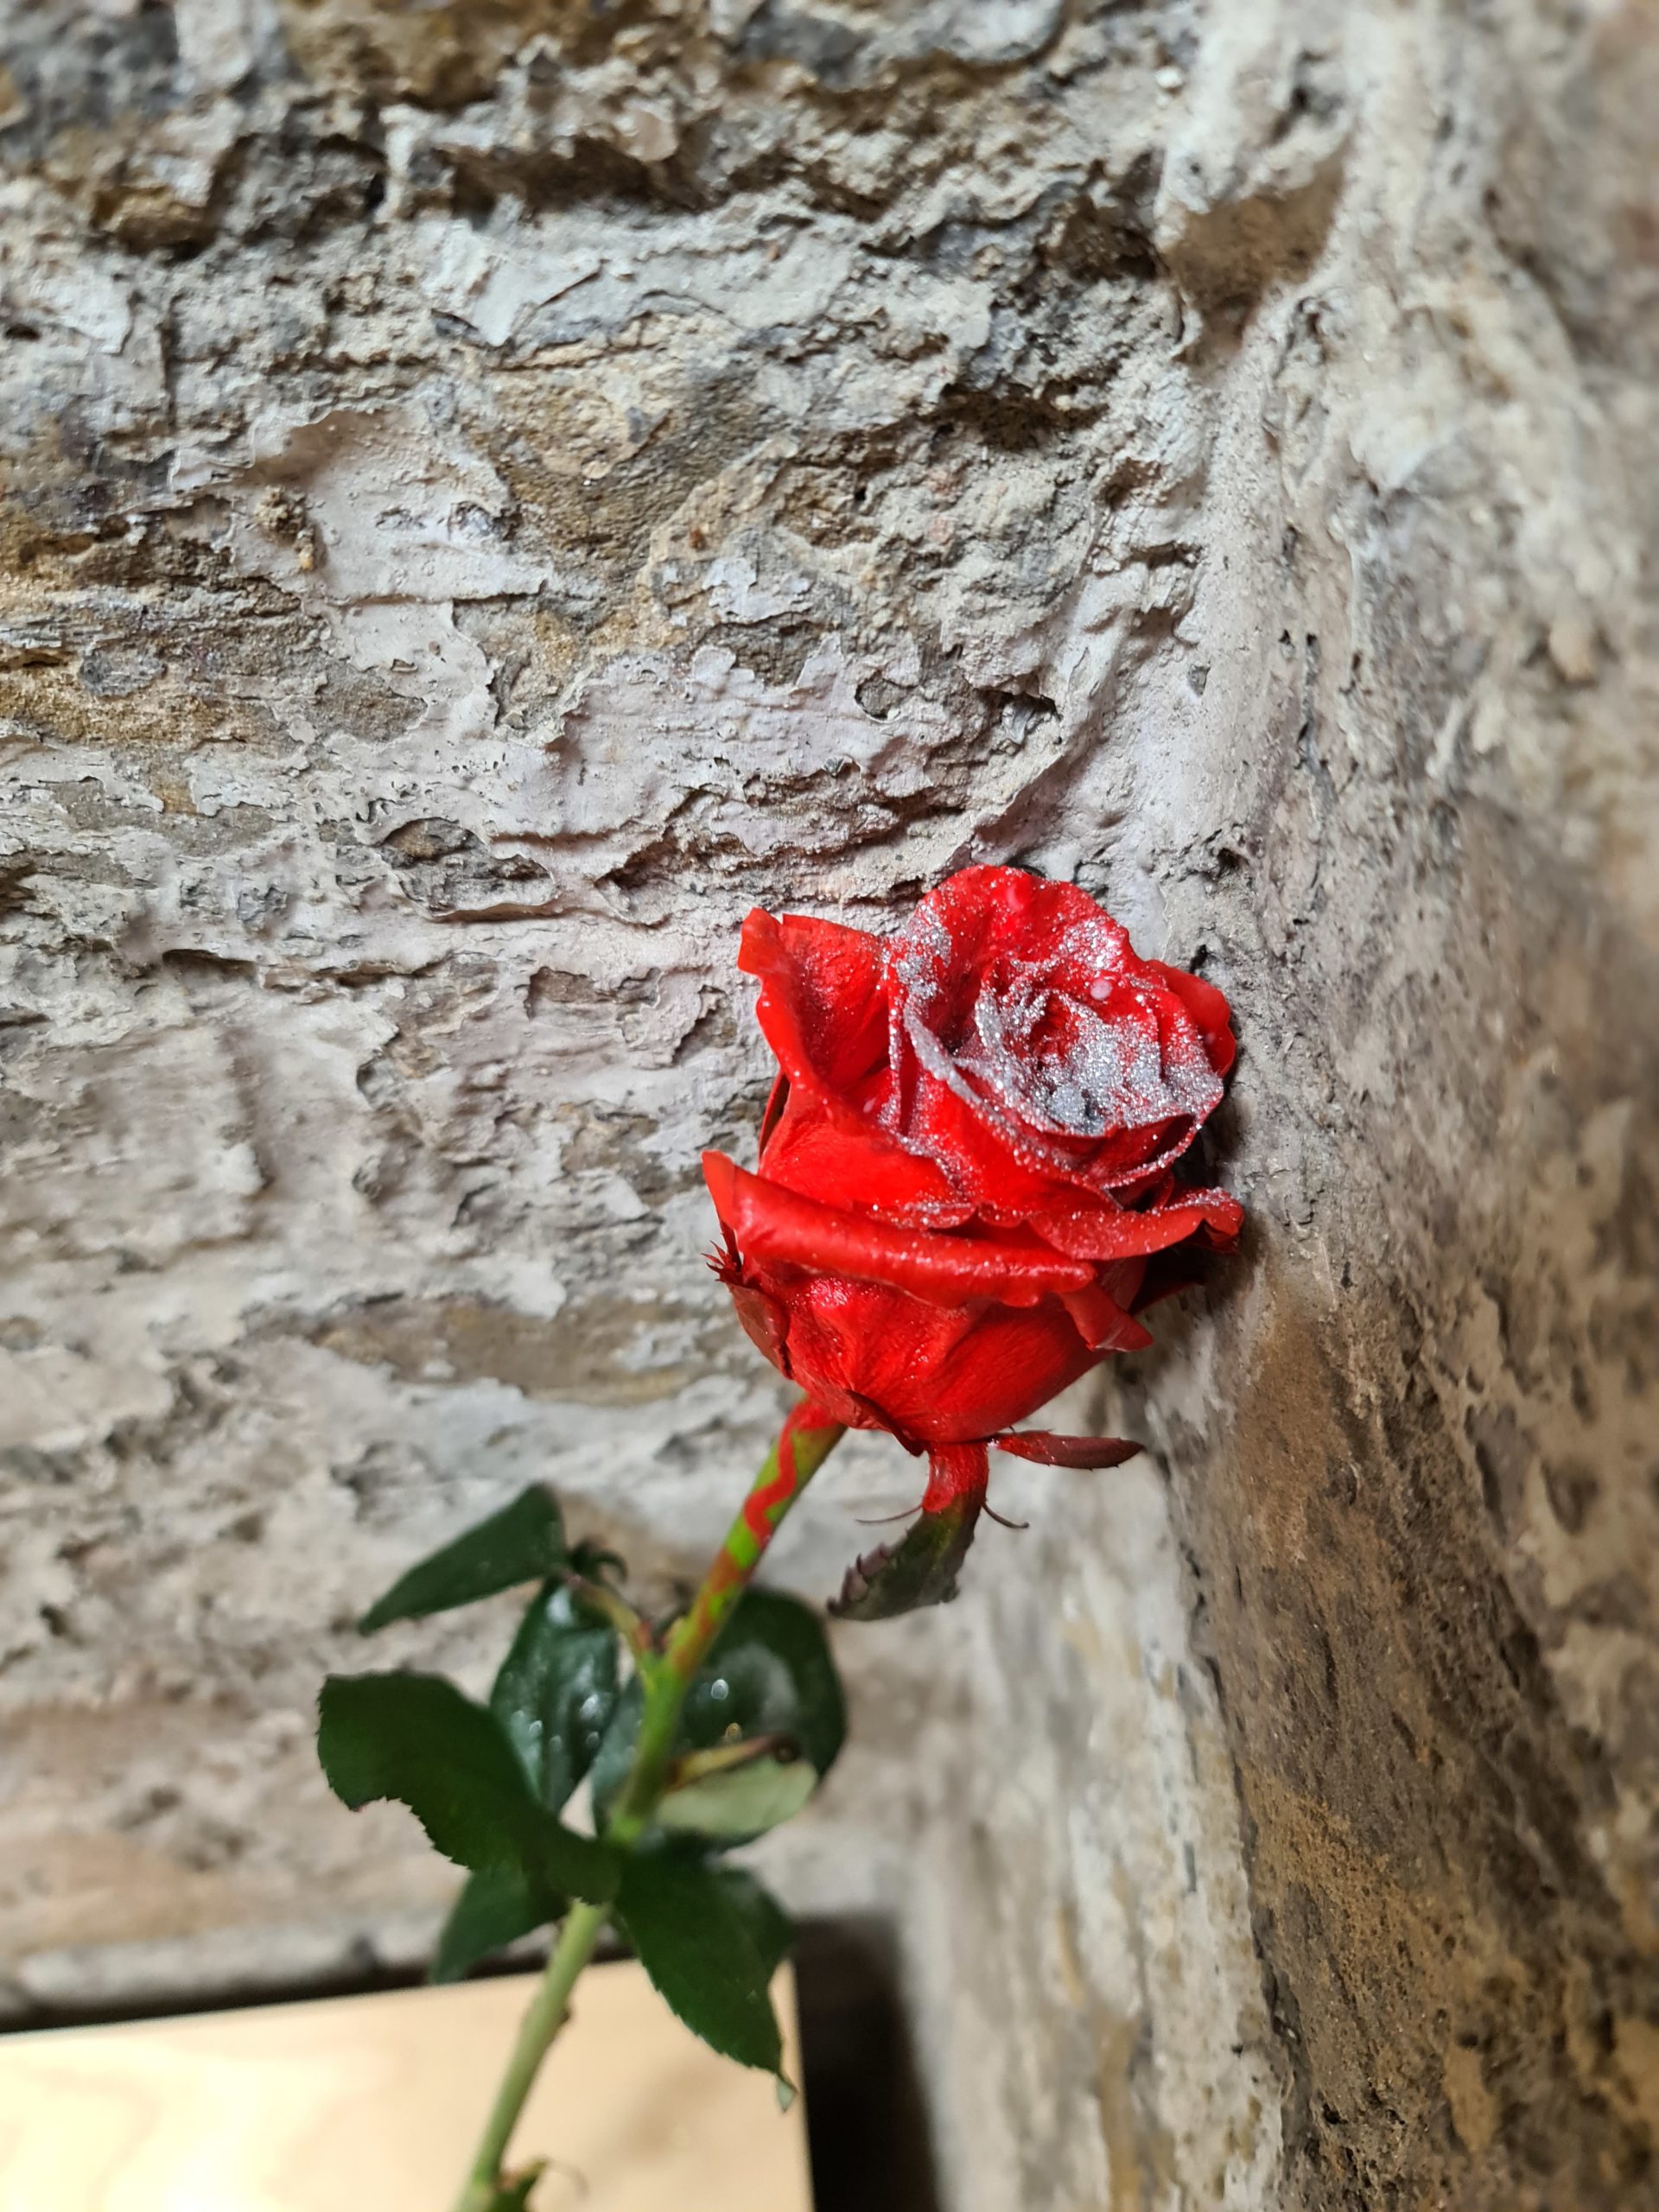 The Diamond Red Roses